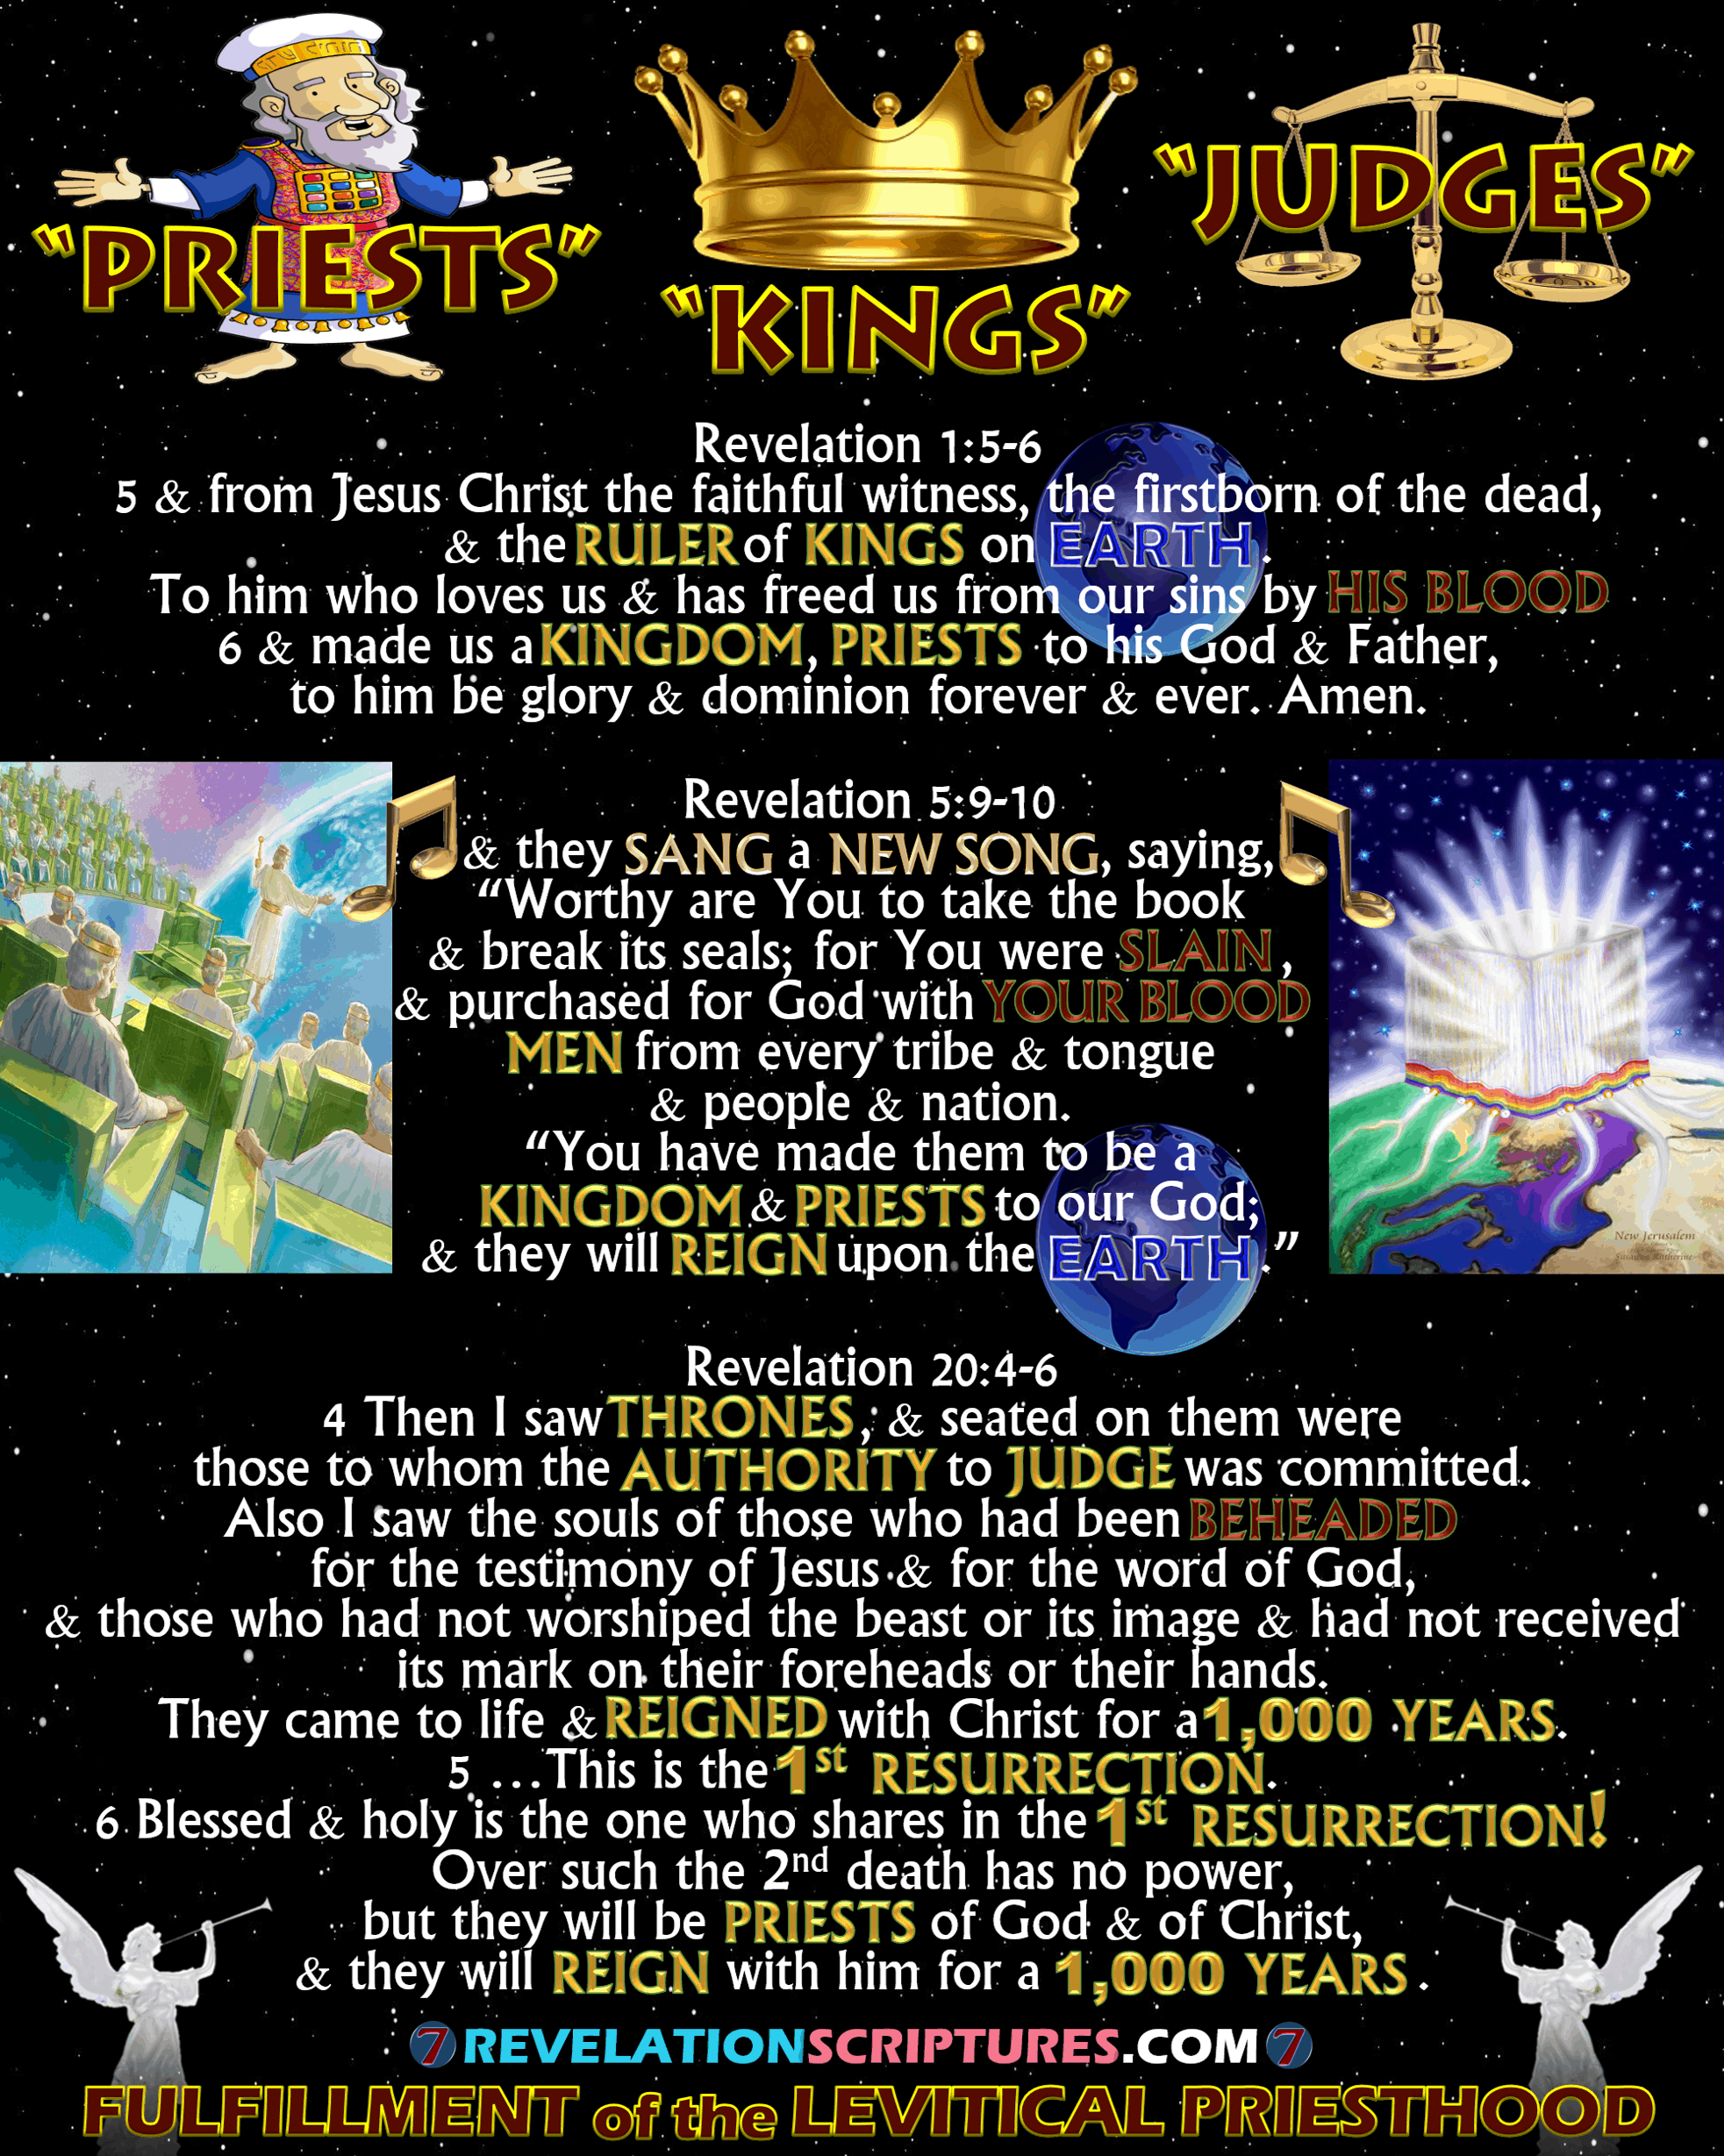 Priests,kings,judges,priest,king,judge,ruler of Kings on earth,revelation 1:5,Revelation 1:6,kingdom,priests to God,sang,new song,blood,slain,reign on the earth,thrones,authority to judge,earth,beheaded,beast,image mark,1000 years,thousand years,1st resurrection,first resurrection,2nd death second death,priests of God & Christ,fulfillment of levitical priesthood,levy priests,new Jerusalem,144000